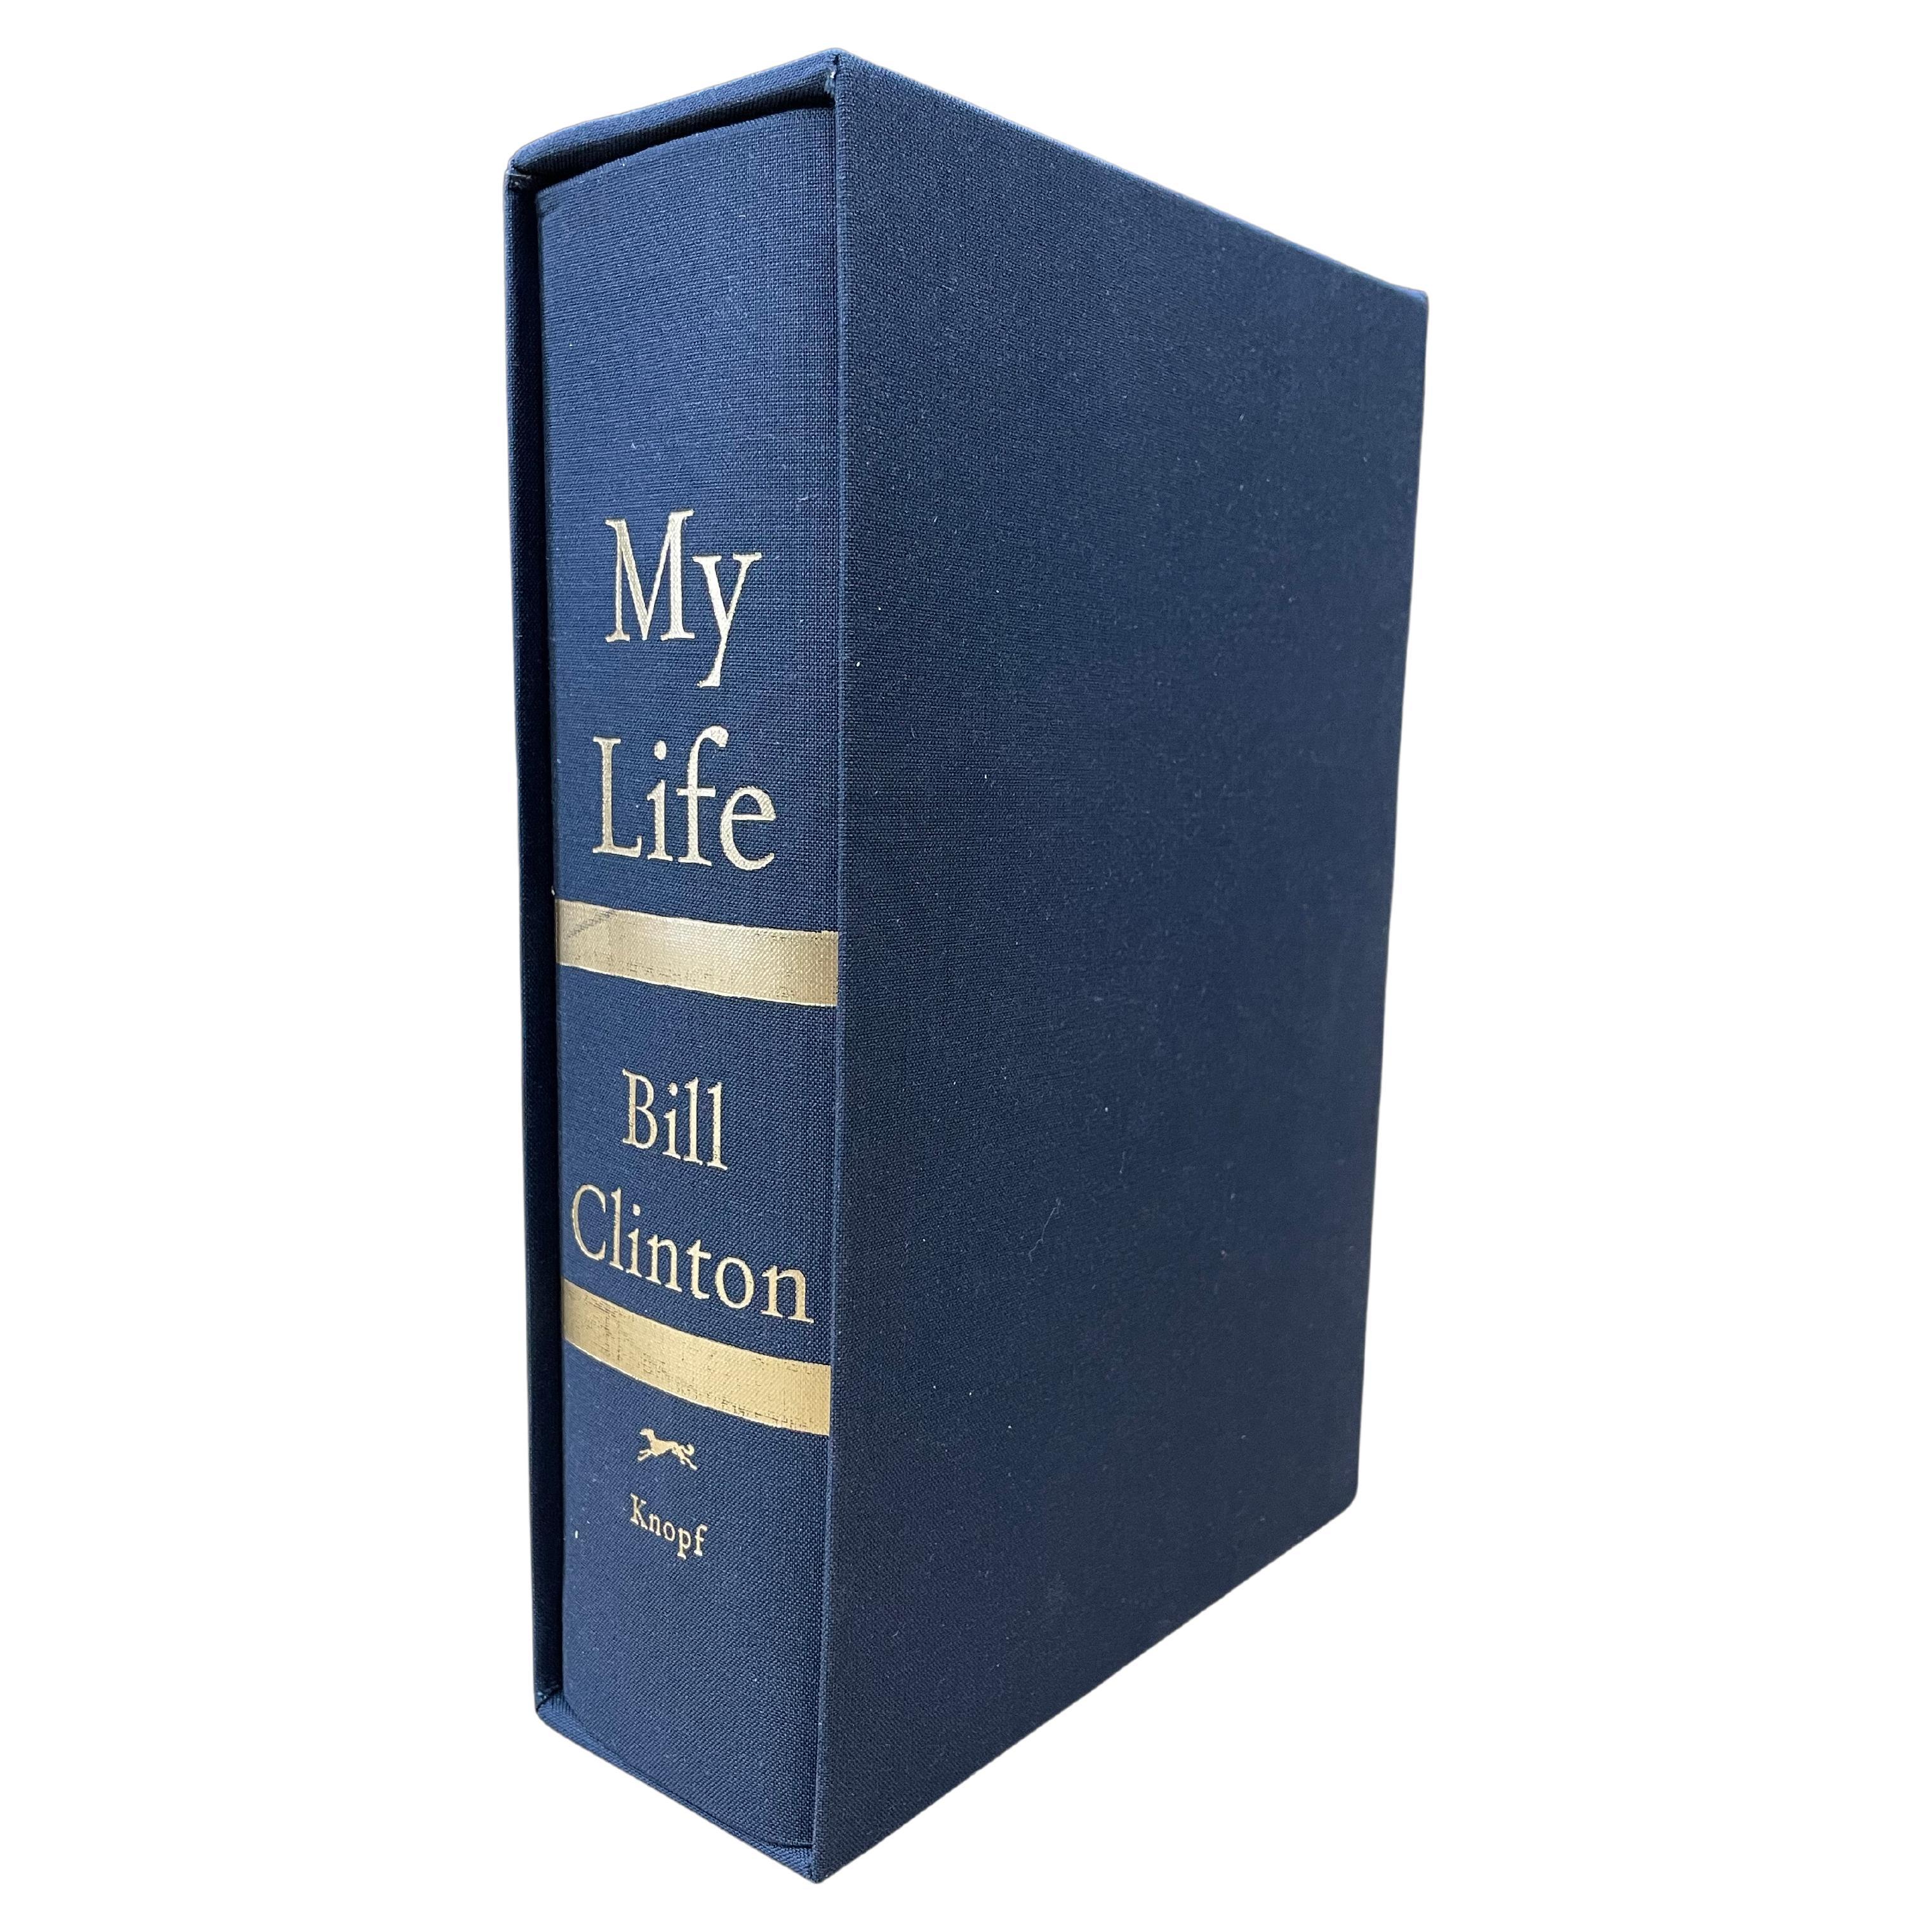 My Life, Signed by Bill Clinton, Signed Limited Edition, No. 1190 of 1500, 2004